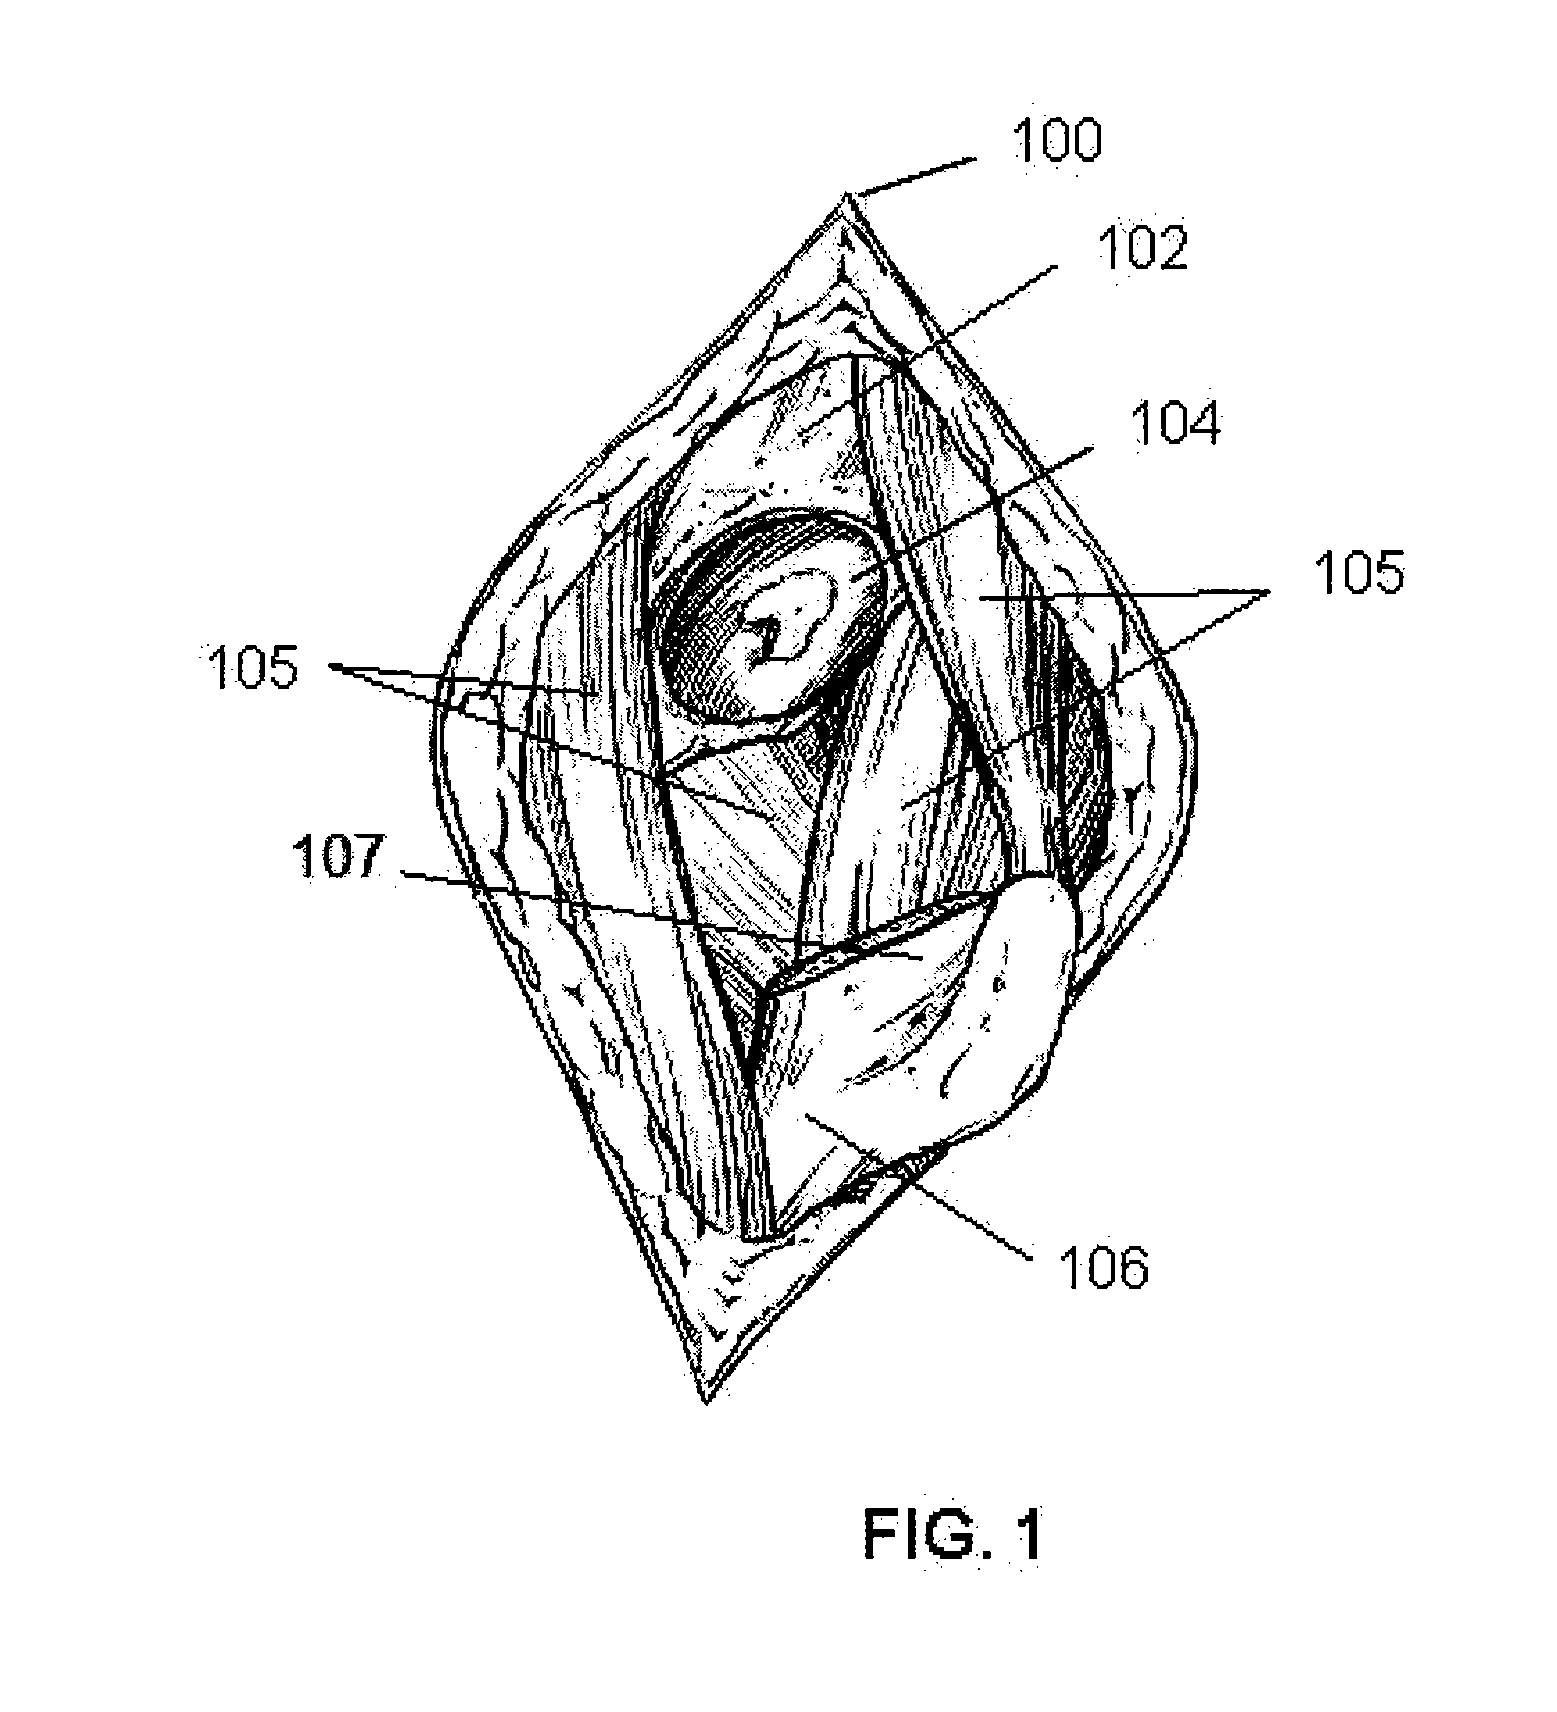 Apparatus and method for sculpting the surface of a joint